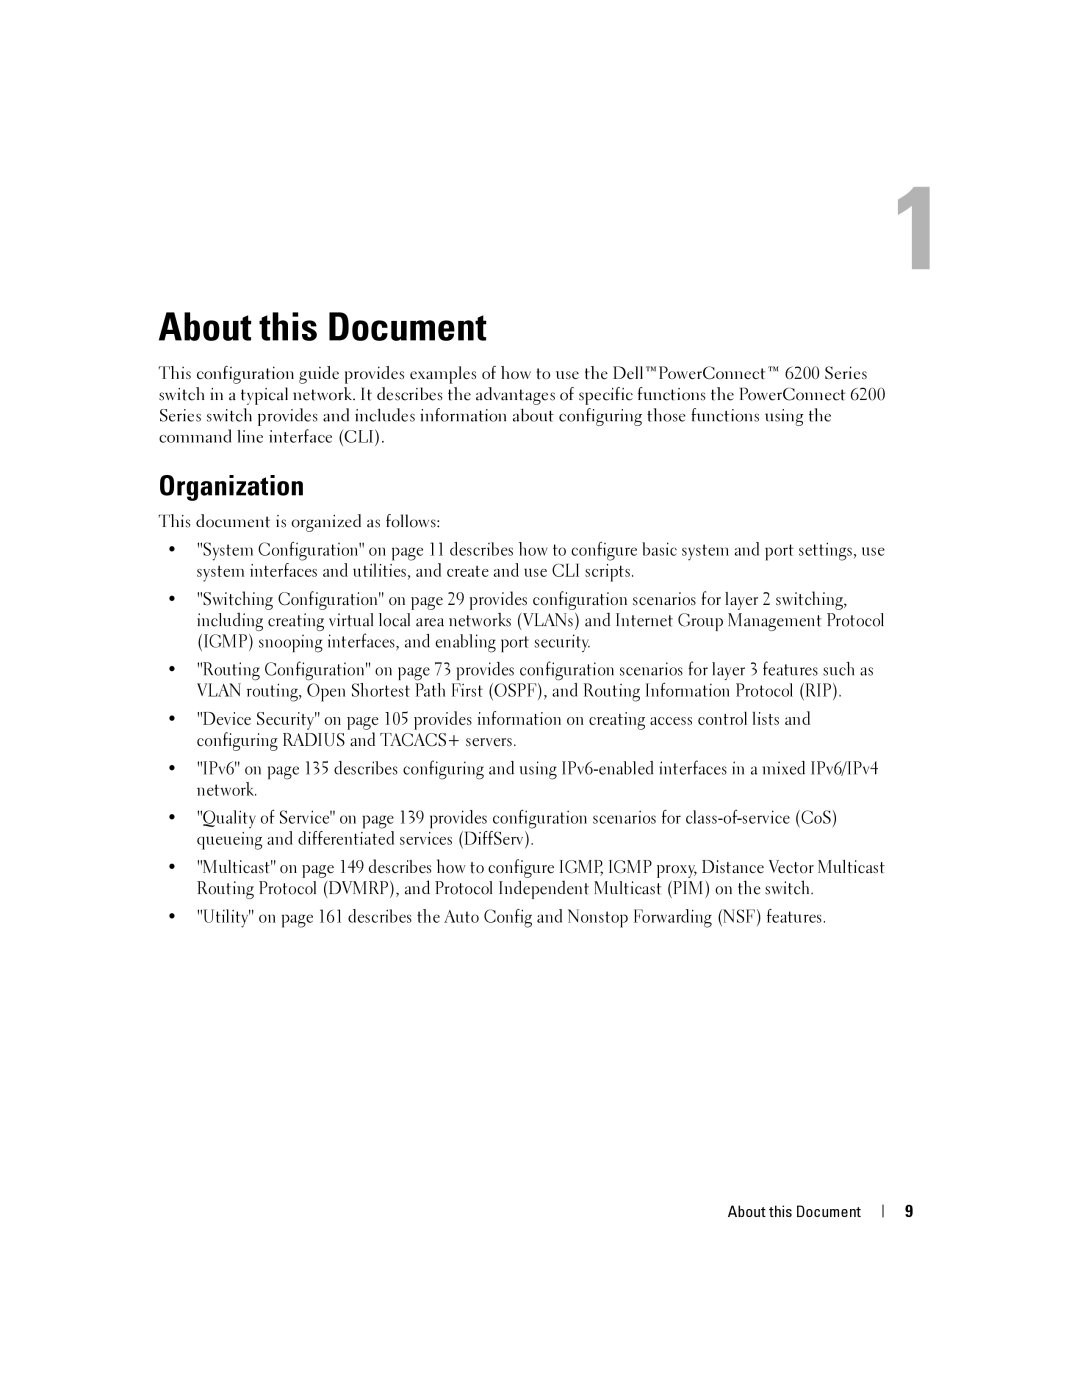 Dell 6200 SERIES manual About this Document, Organization 